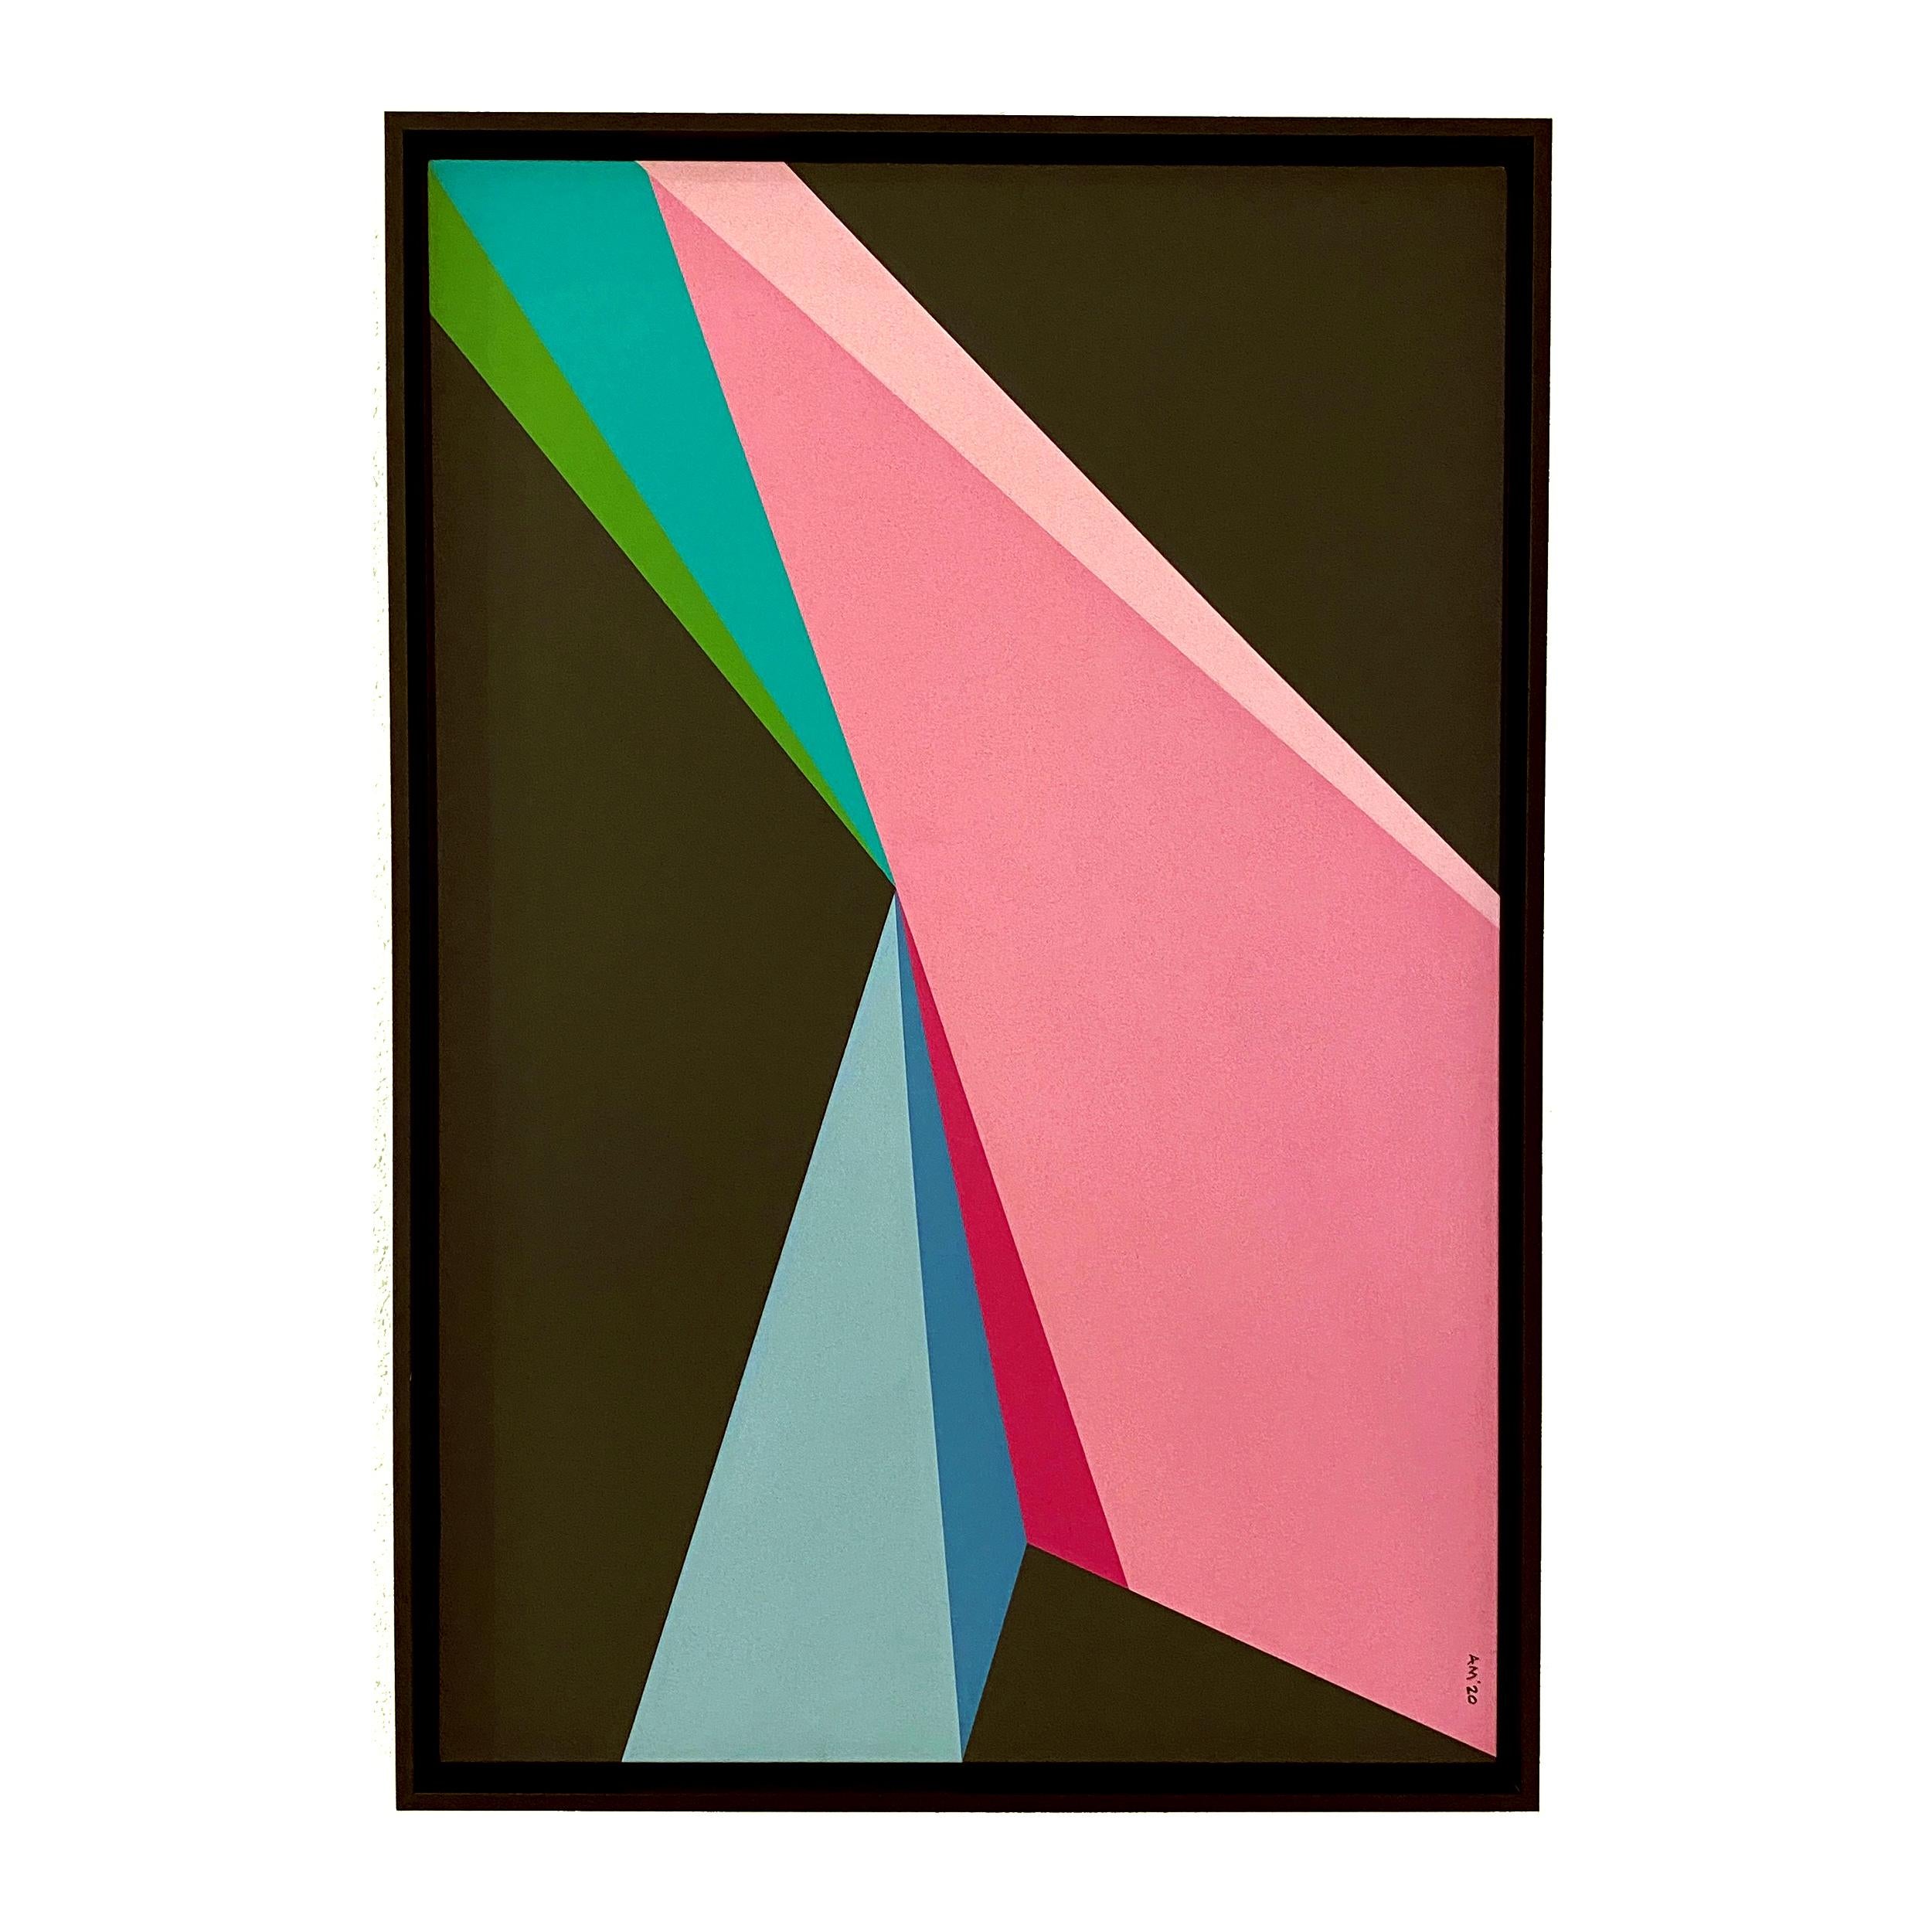 Andrew Mandolene
”Pink Prowess”
Acrylic on canvas
Framed

Dimensions:
unframed - 24